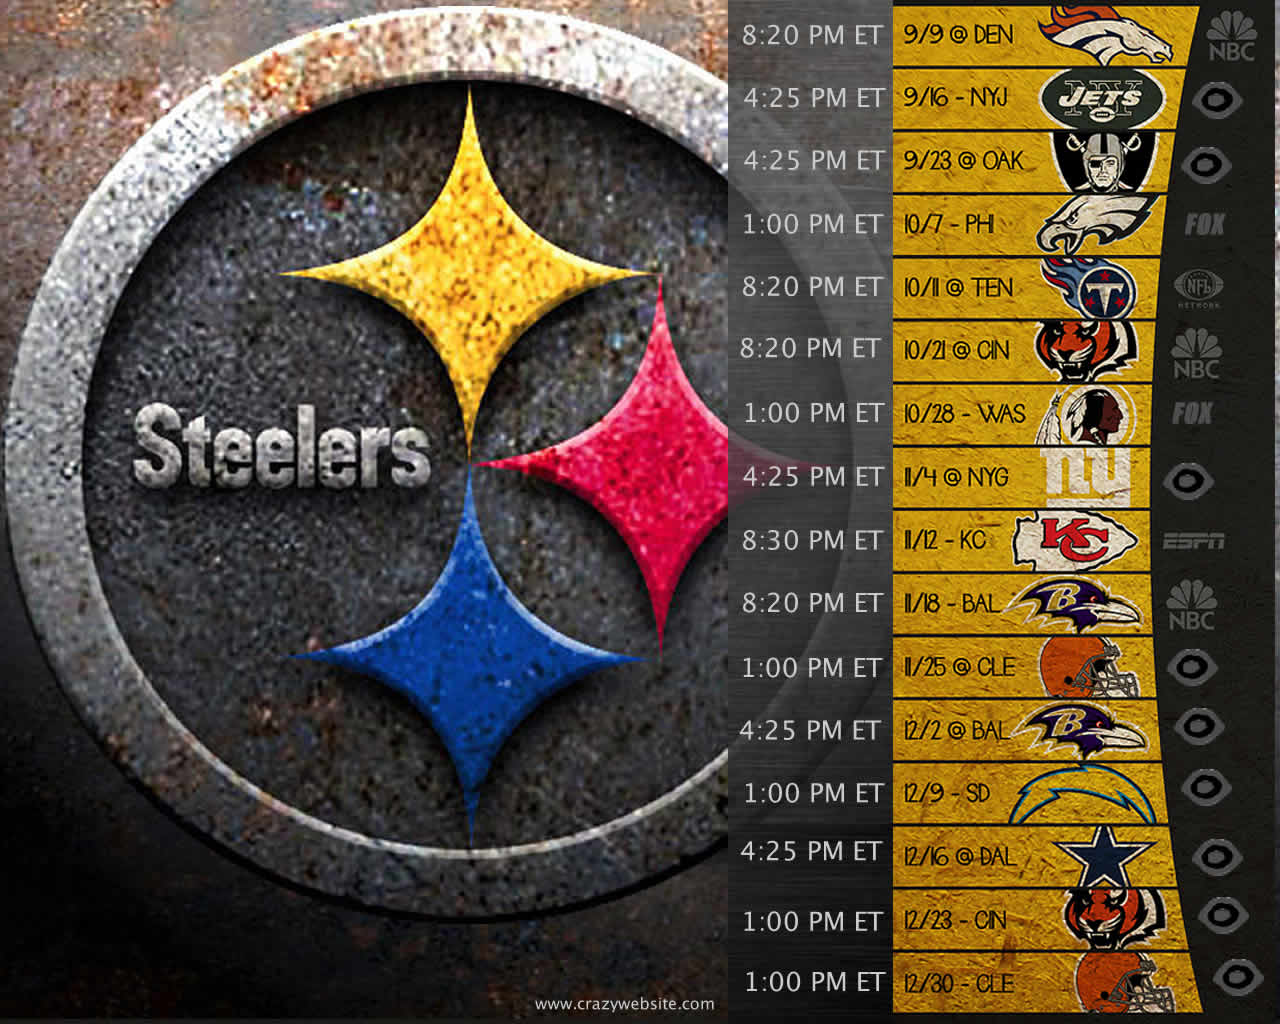 Steelers Funny Pic Wallpapers